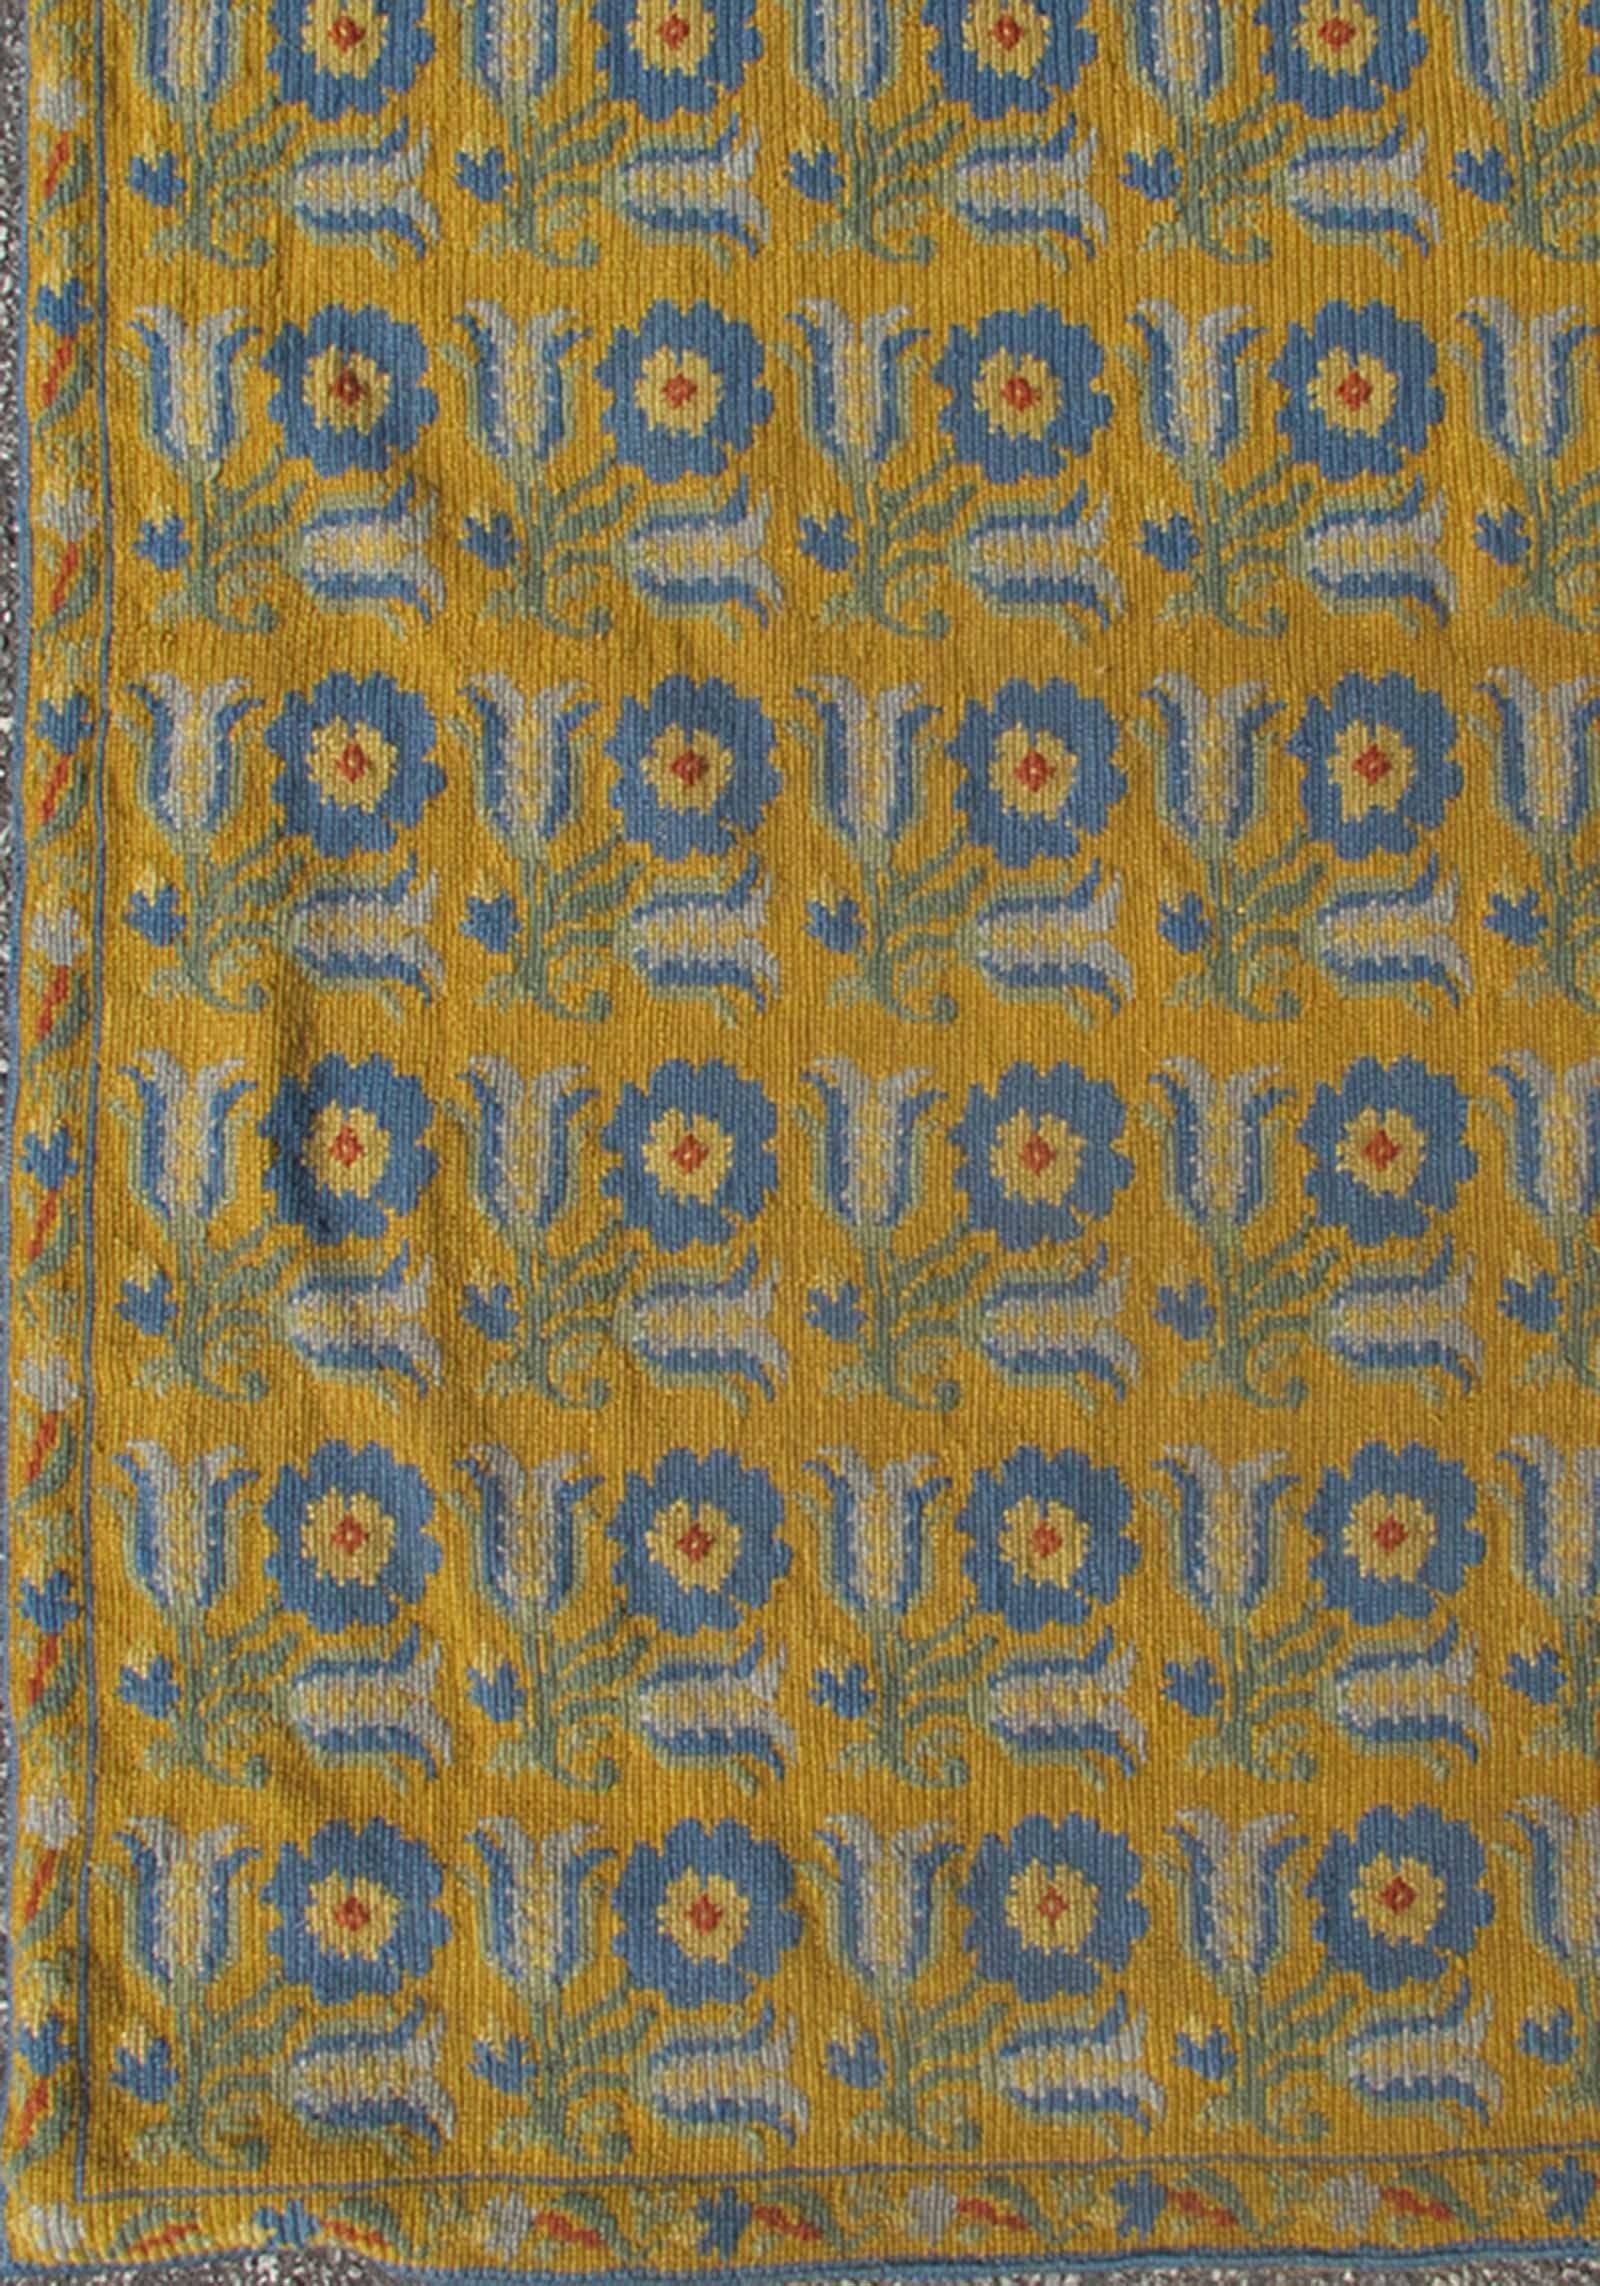 Long Antique Greek Needlepoint Runner from early 20th century, with a unique Floral Design in Yellow, 13-0307, This Greek needlepoint features repeating flowers of various shades of blue and hints of green. 
3'3 x 17'9.
List Price   $9,500
